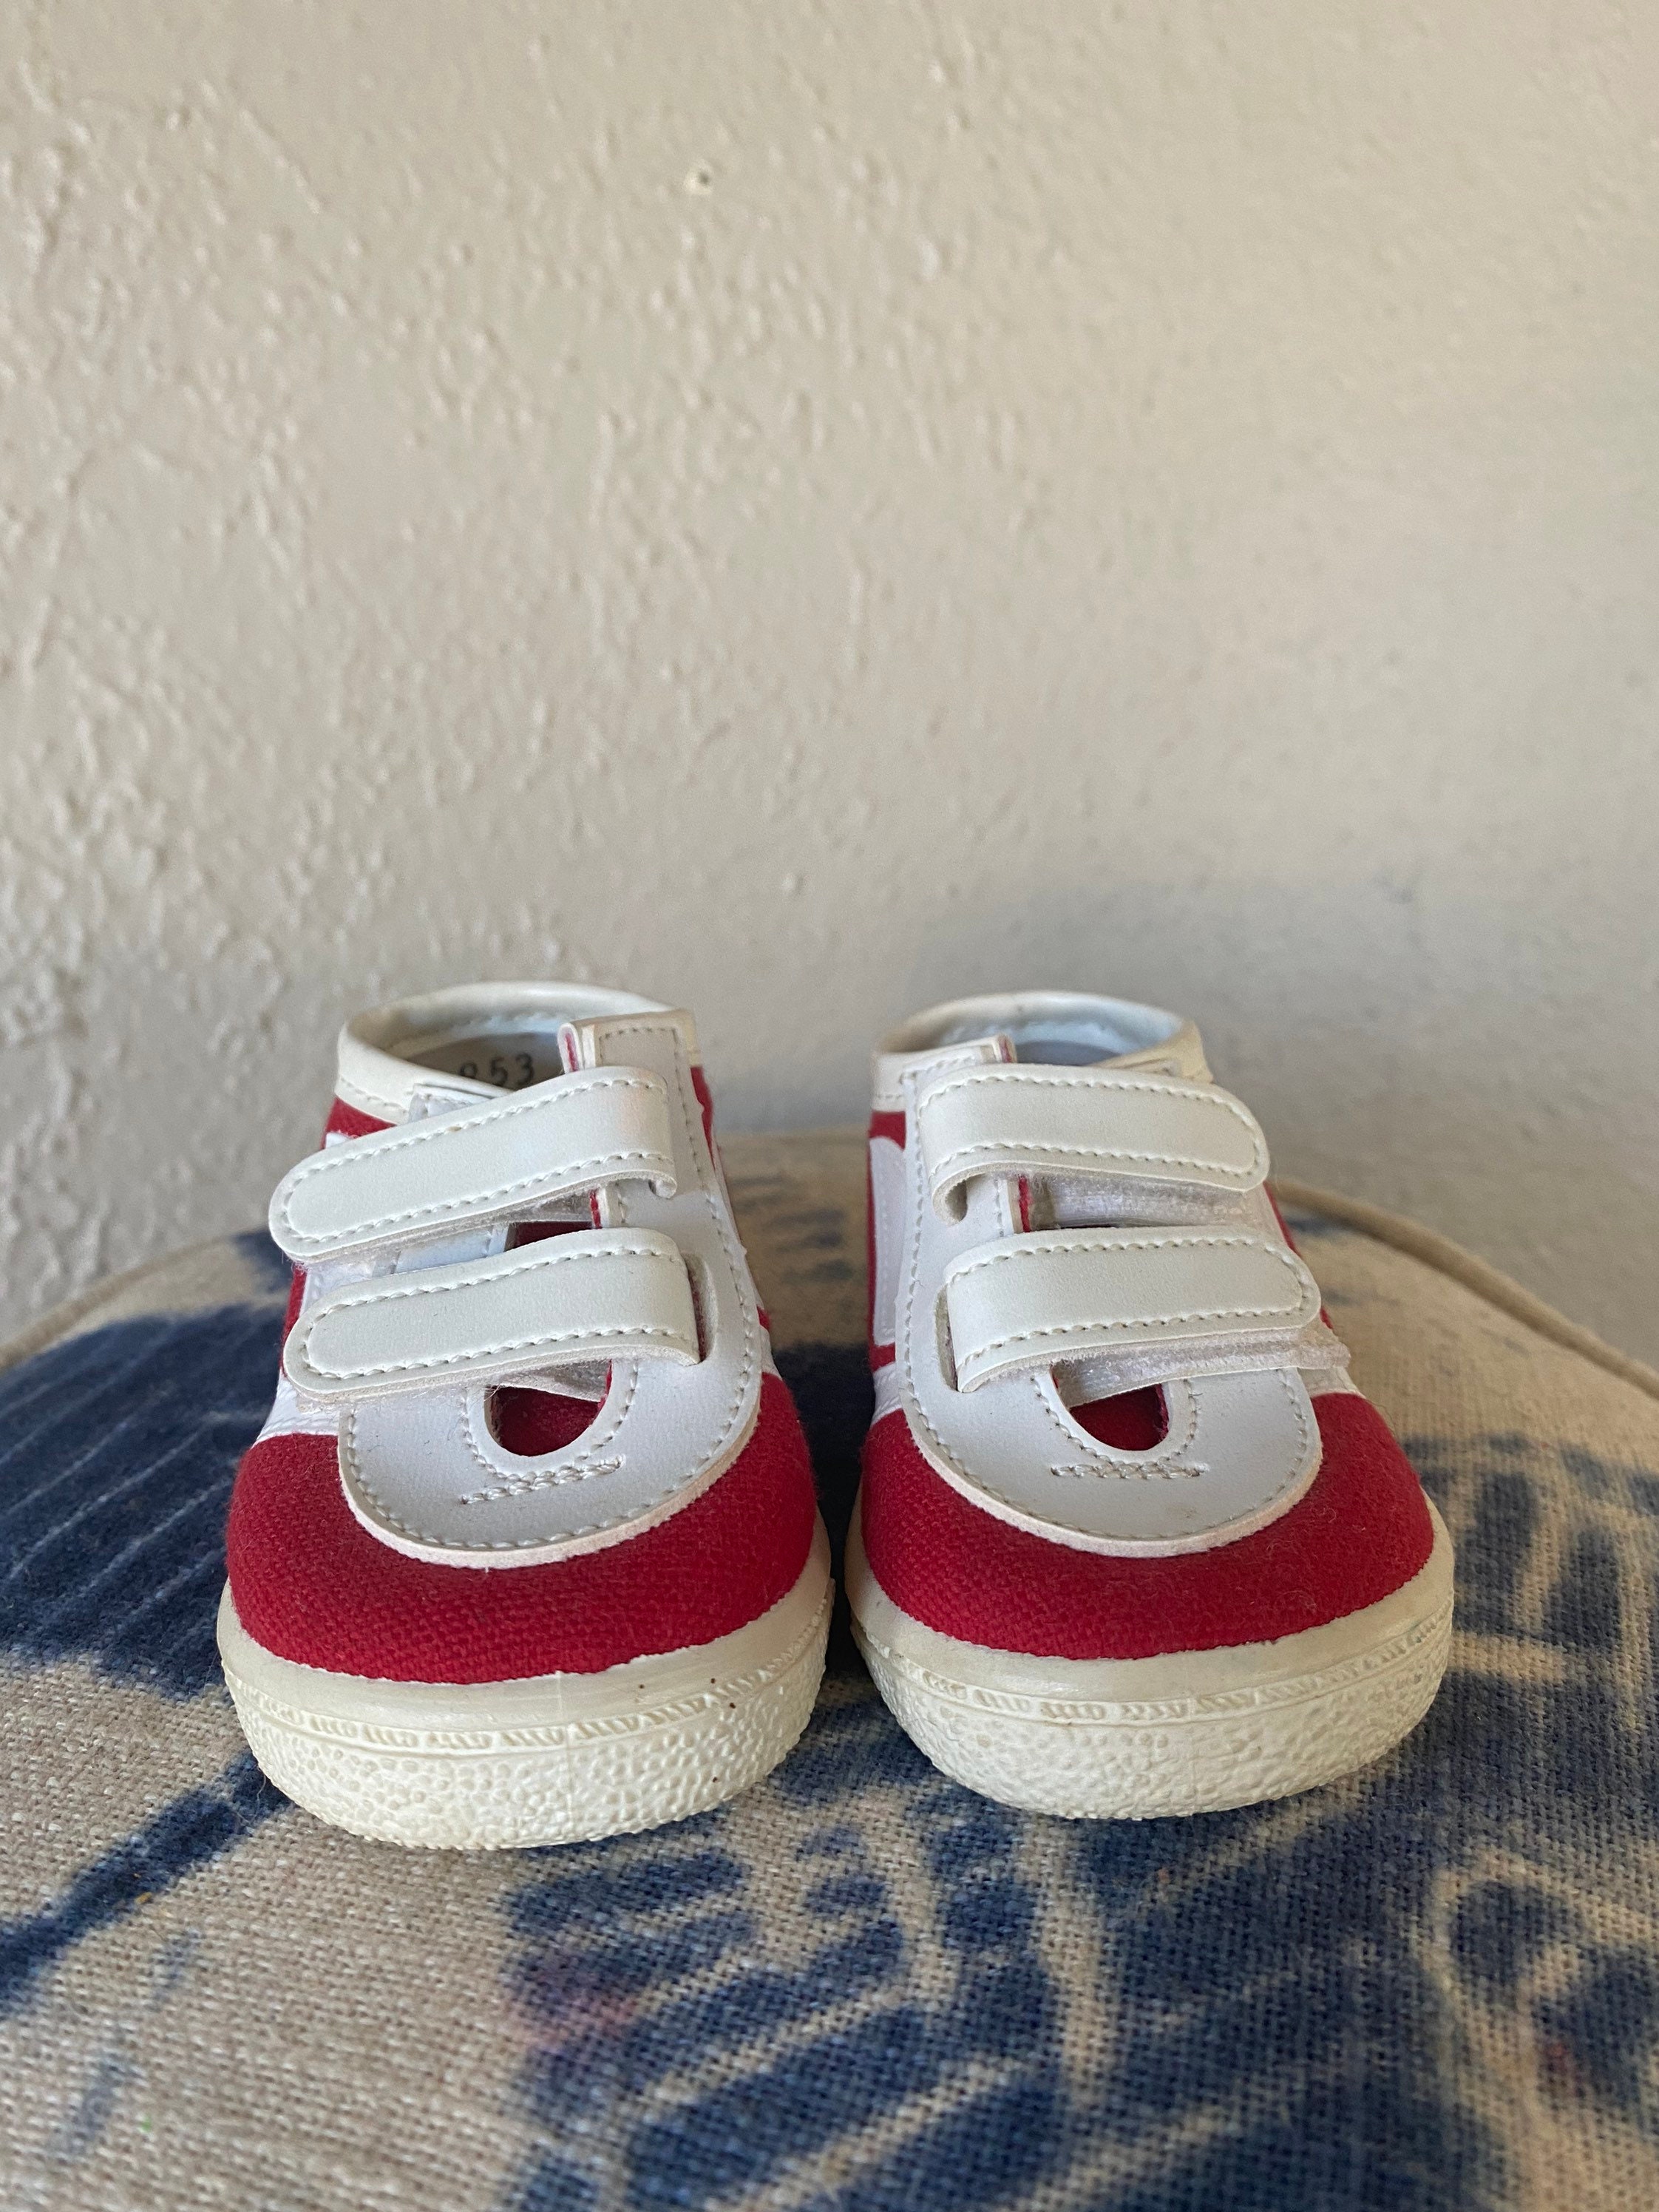 1970s Velcro Sneakers Baby Size 1 Made In USA | Etsy